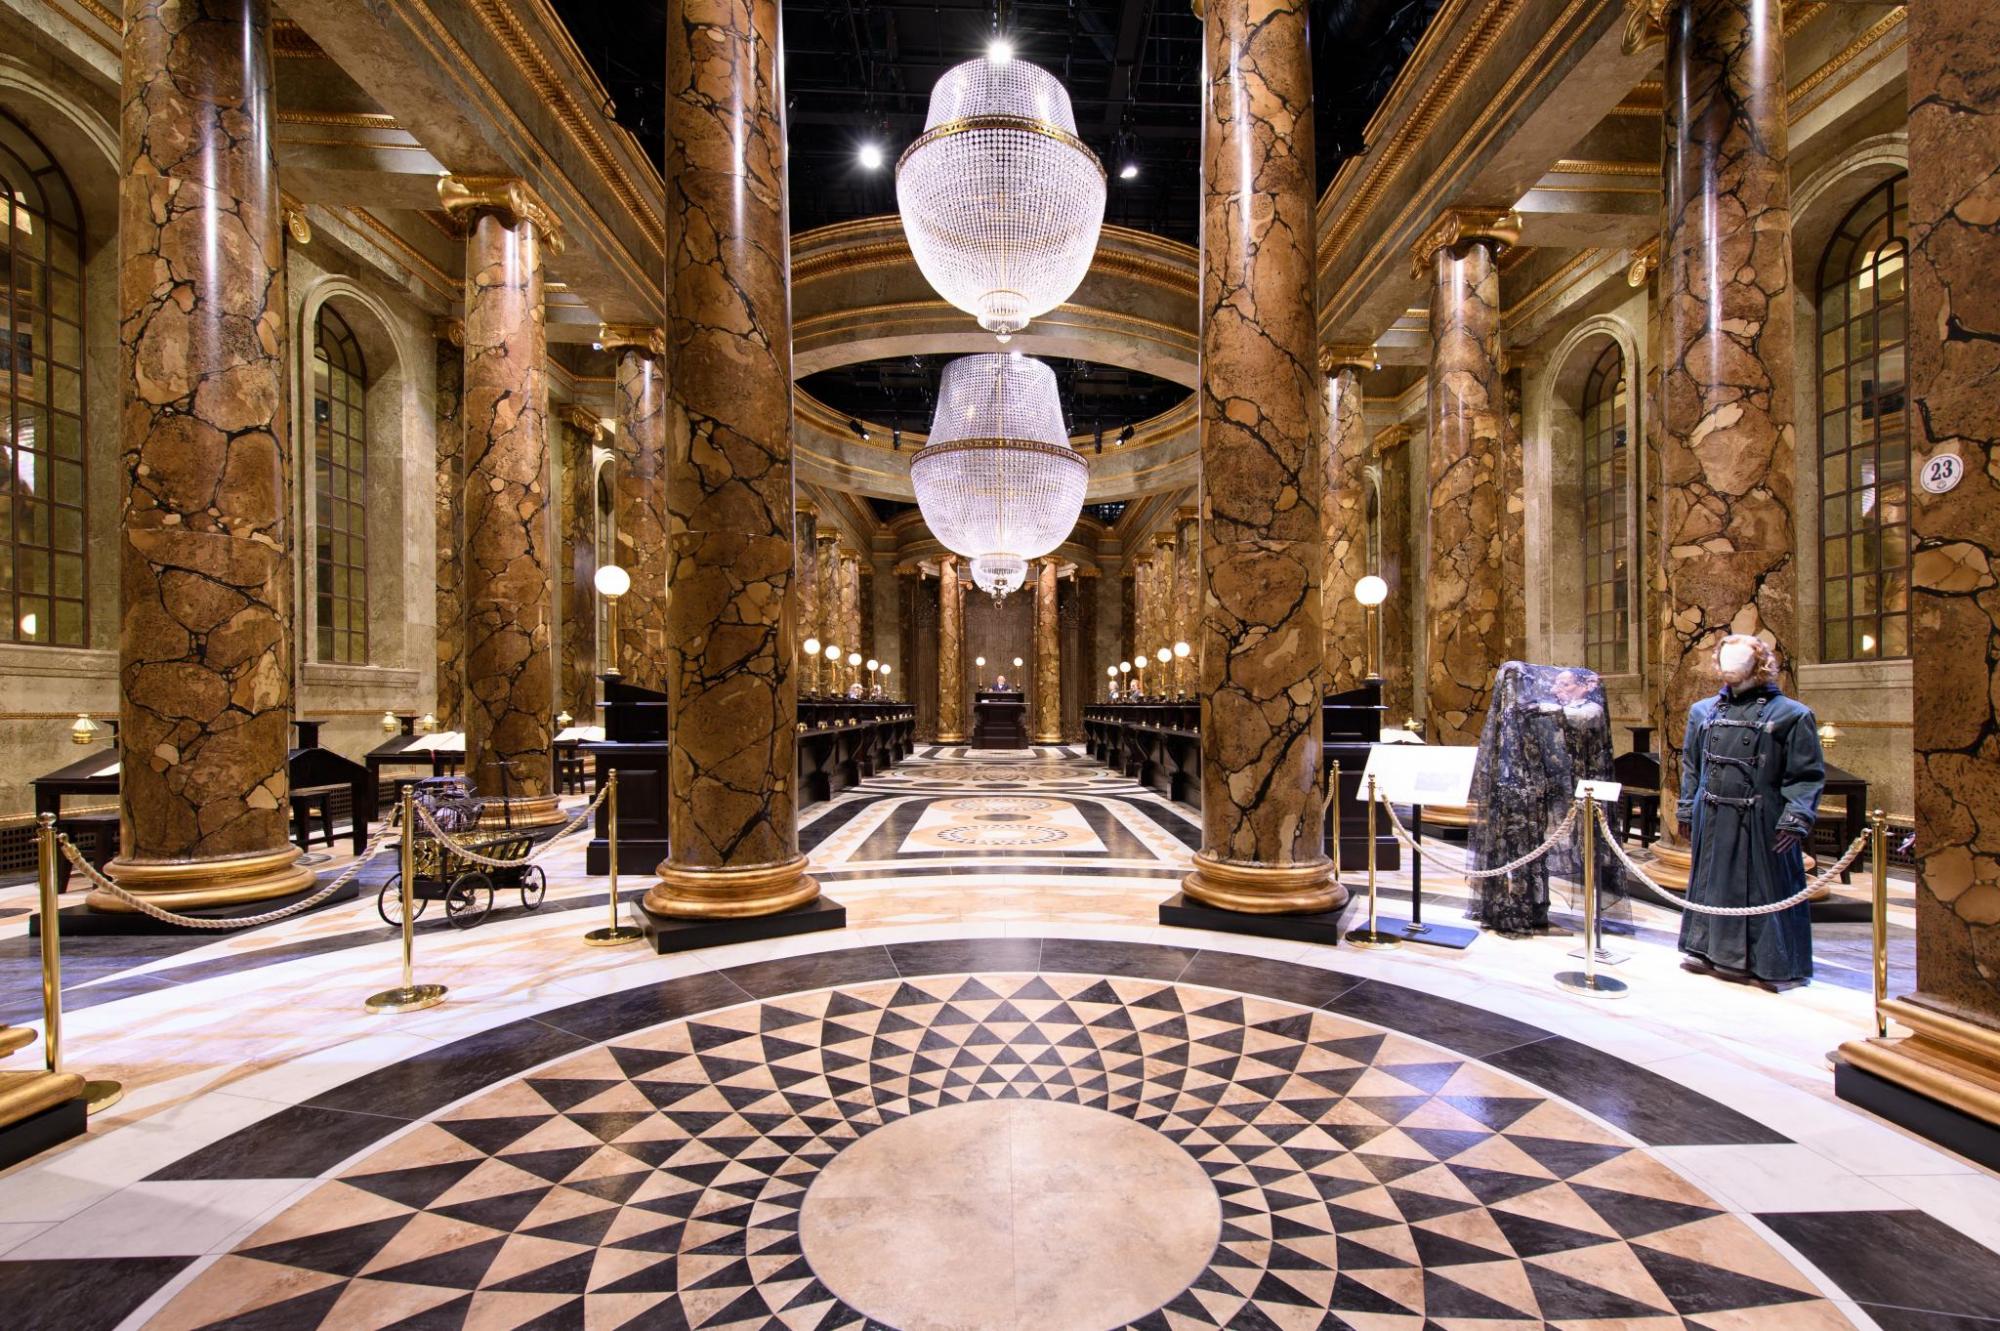 The marble hall of Gringotts Bank from the Harry Potter films